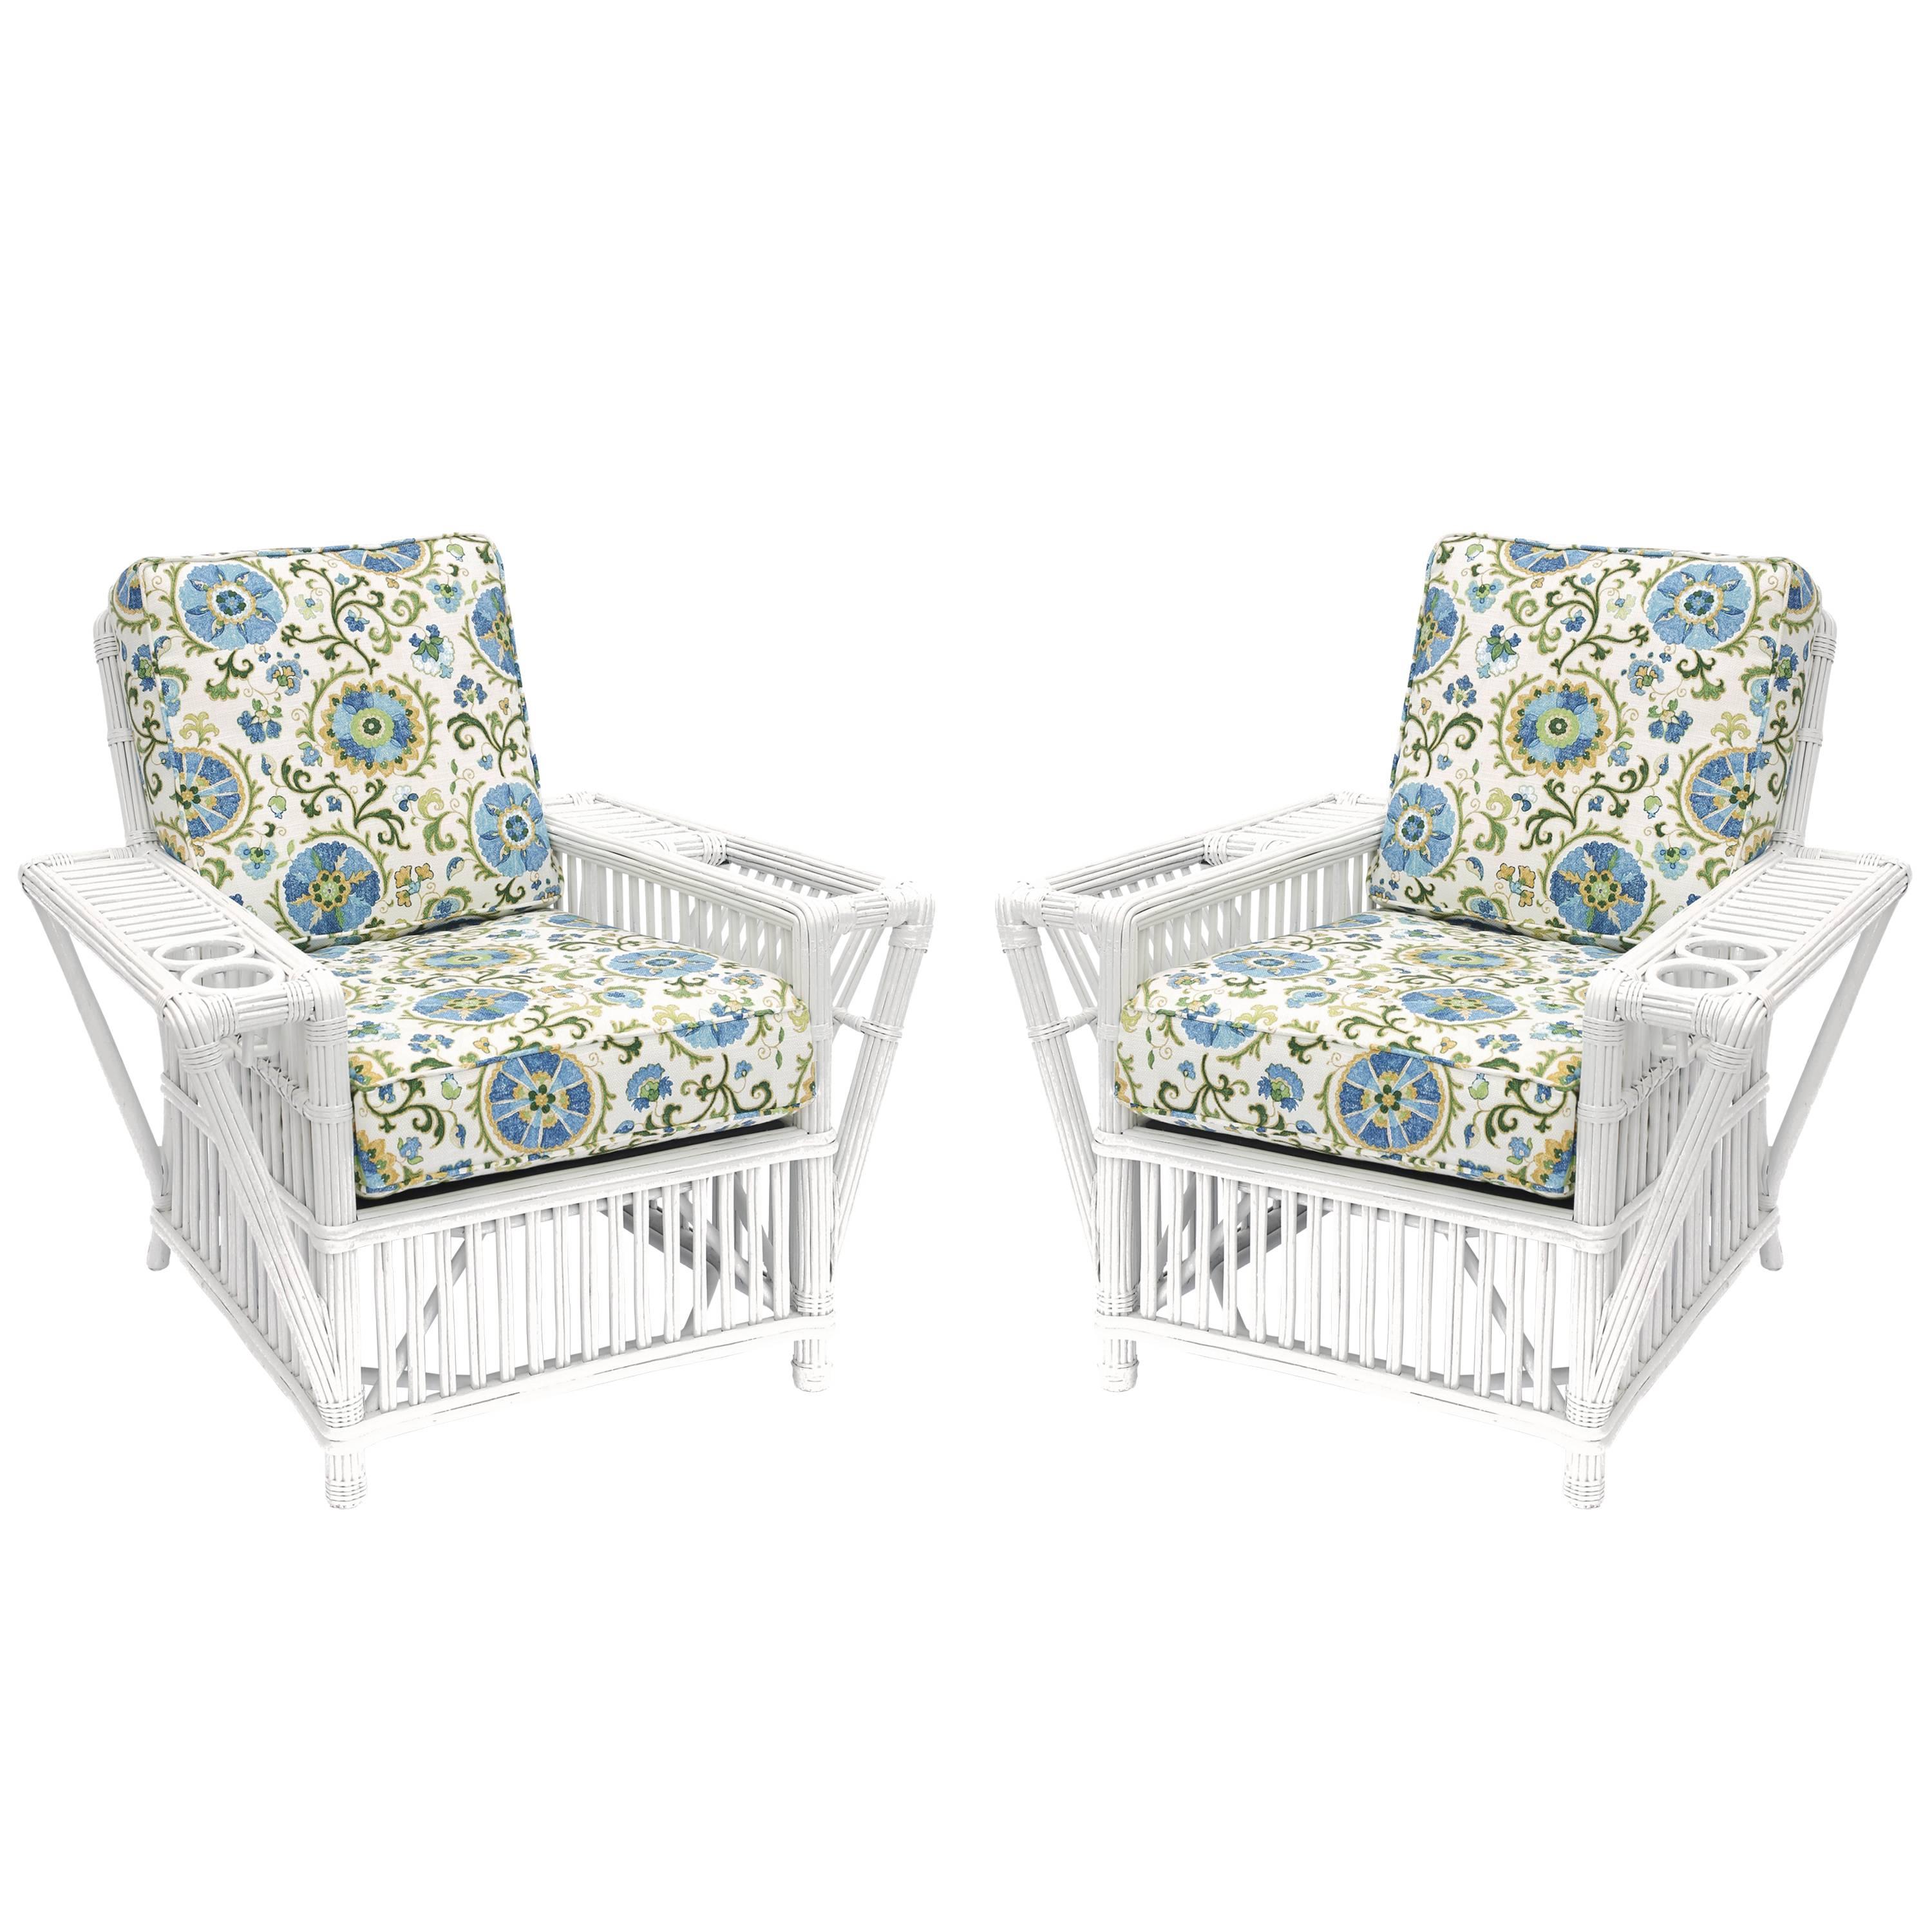 Pair of Art Deco Style Painted Stick Wicker Armchairs by Palecek